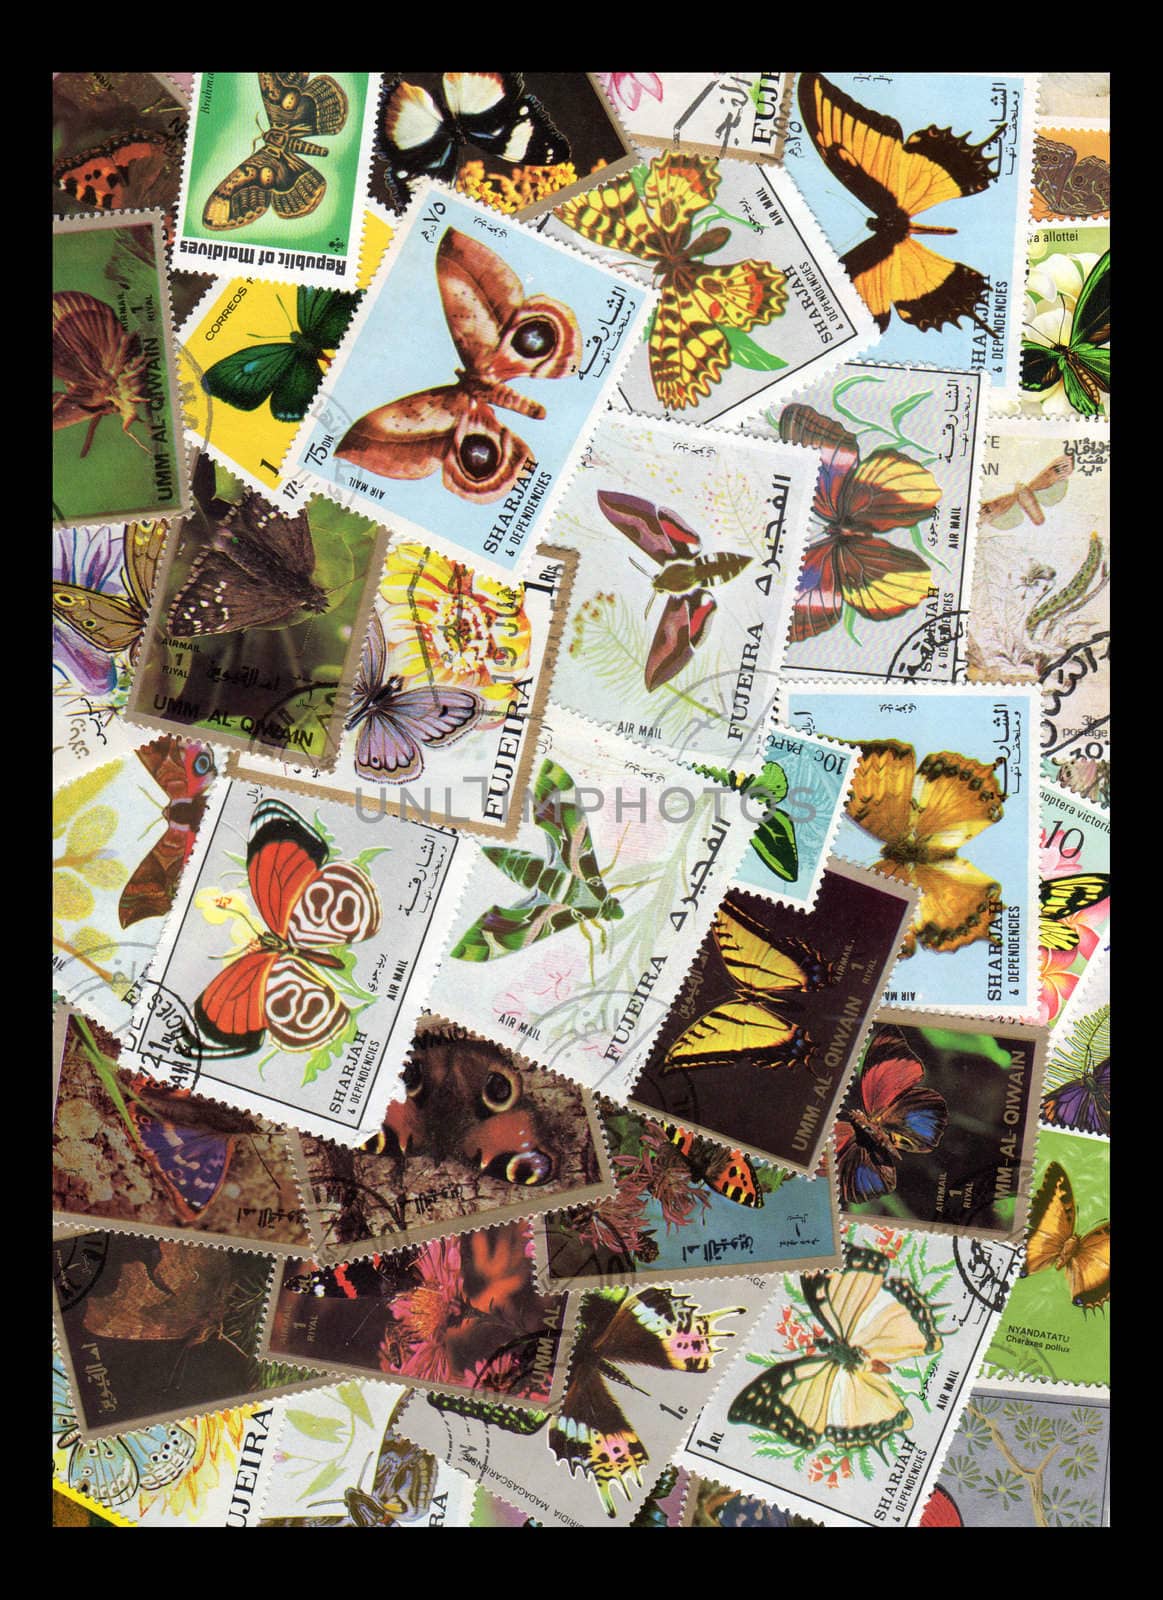 A Collectin of Butterfly Stamps  by d40xboy